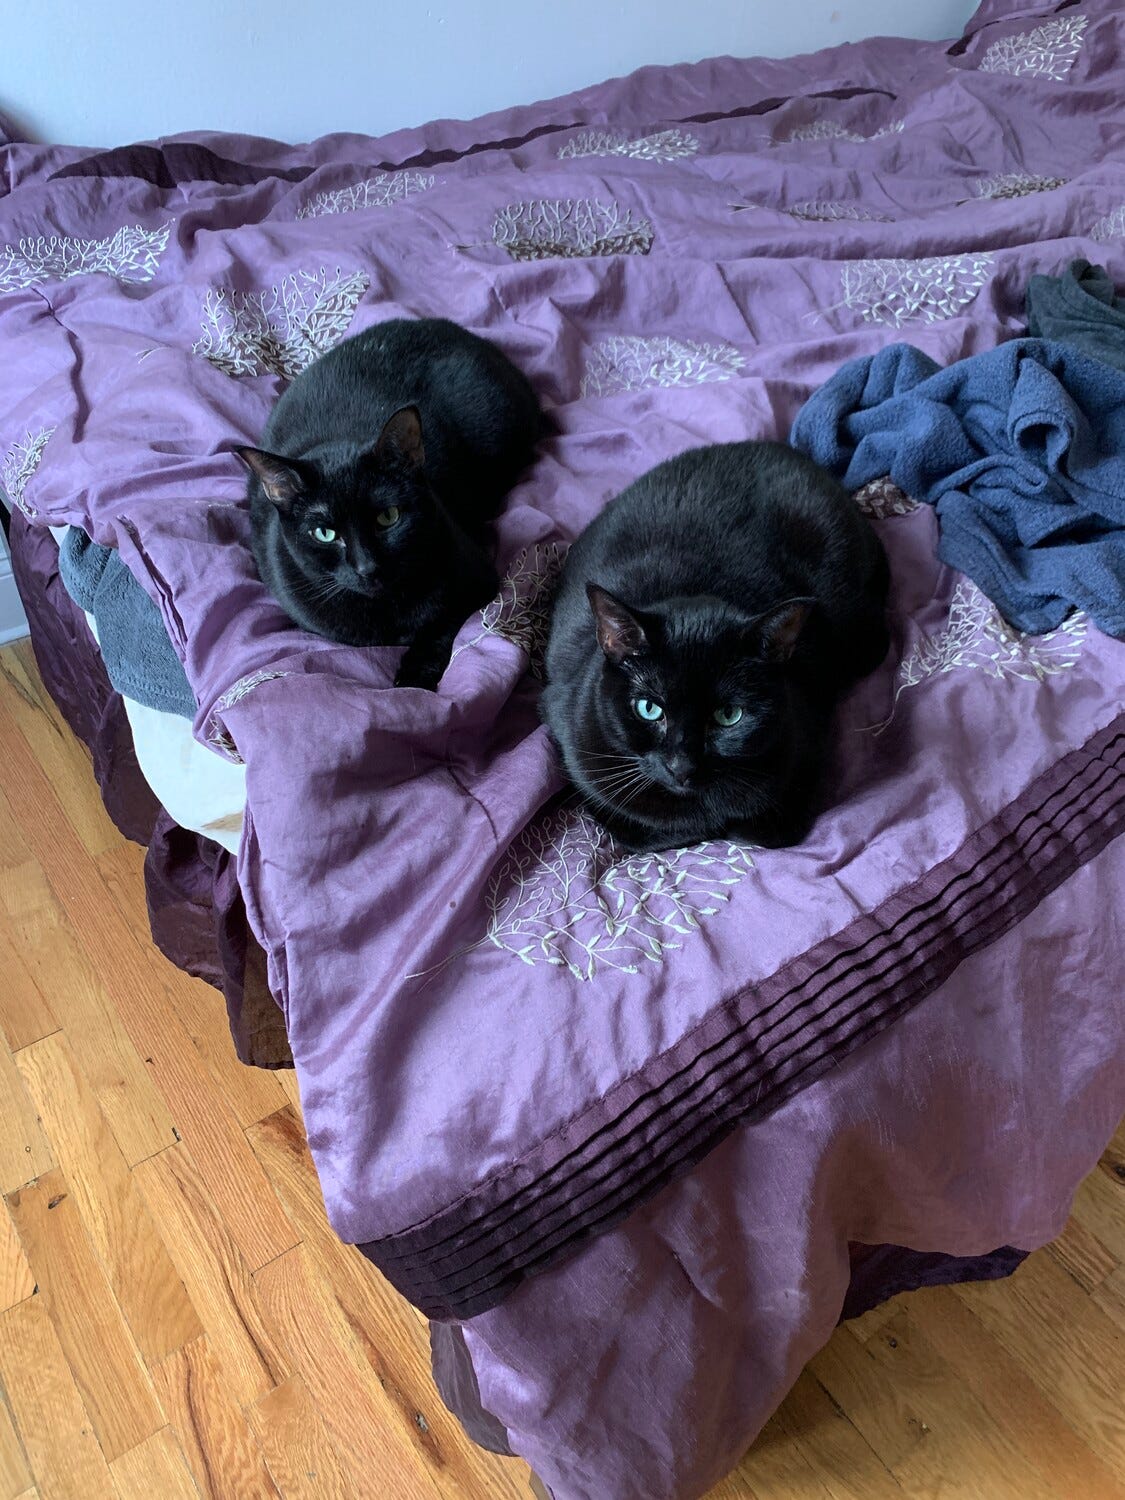 Two black cats, curled up on a purple coverlet